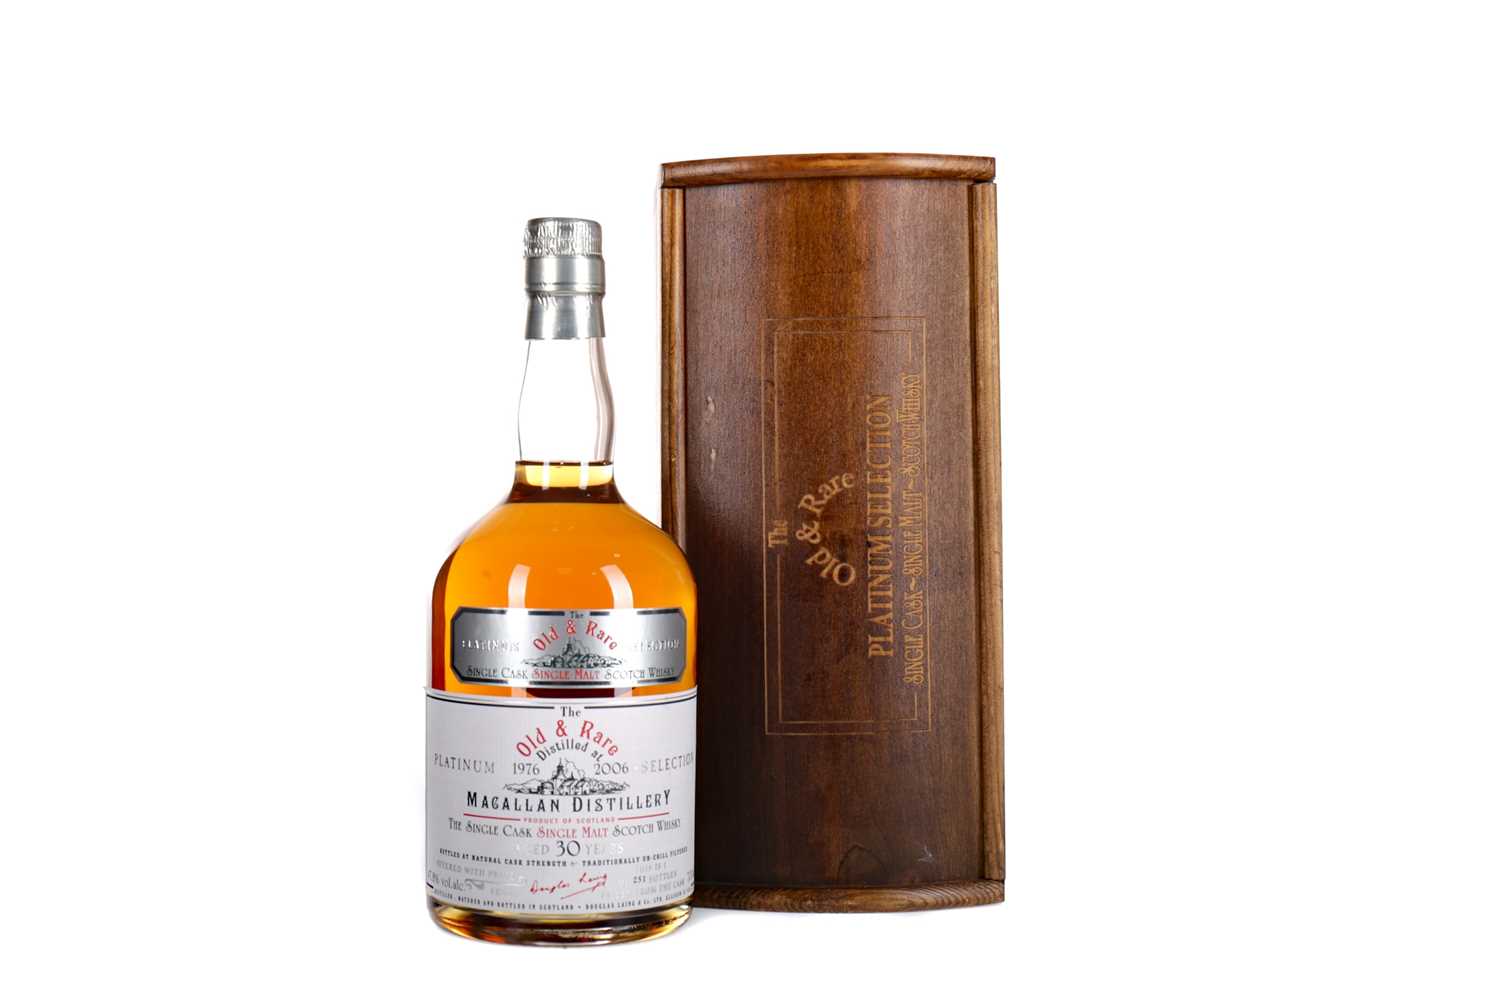 Lot 123 - MACALLAN 1976 OLD & RARE AGED 30 YEARS